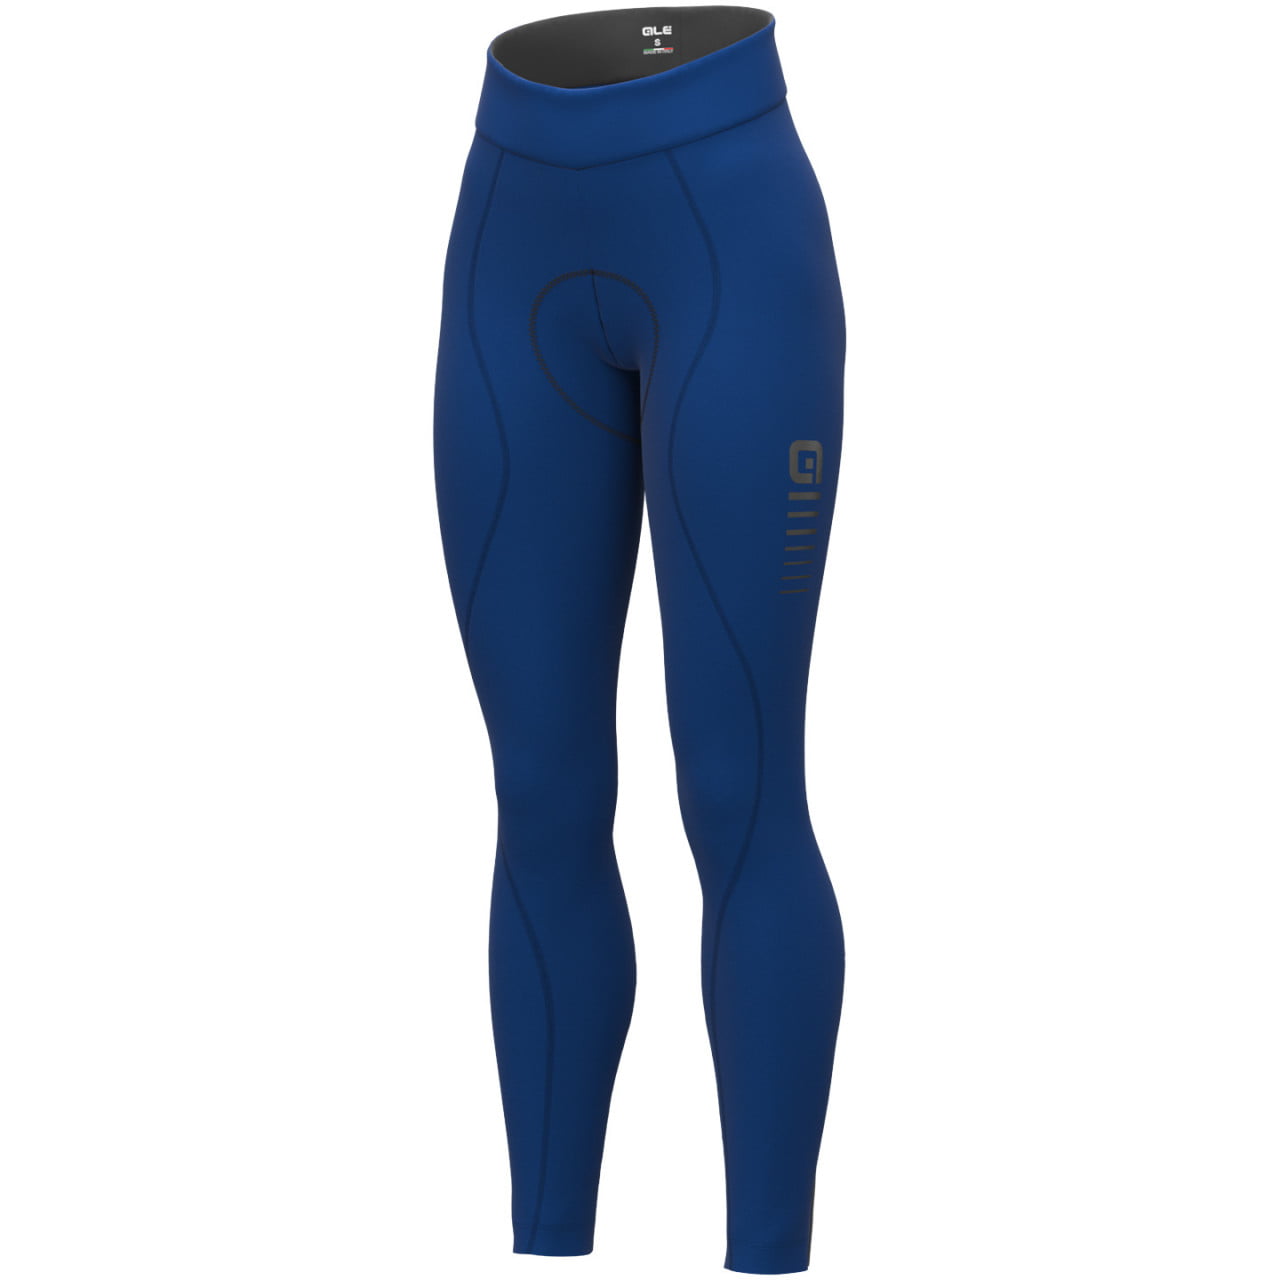 Essential Women's Cycling Tights